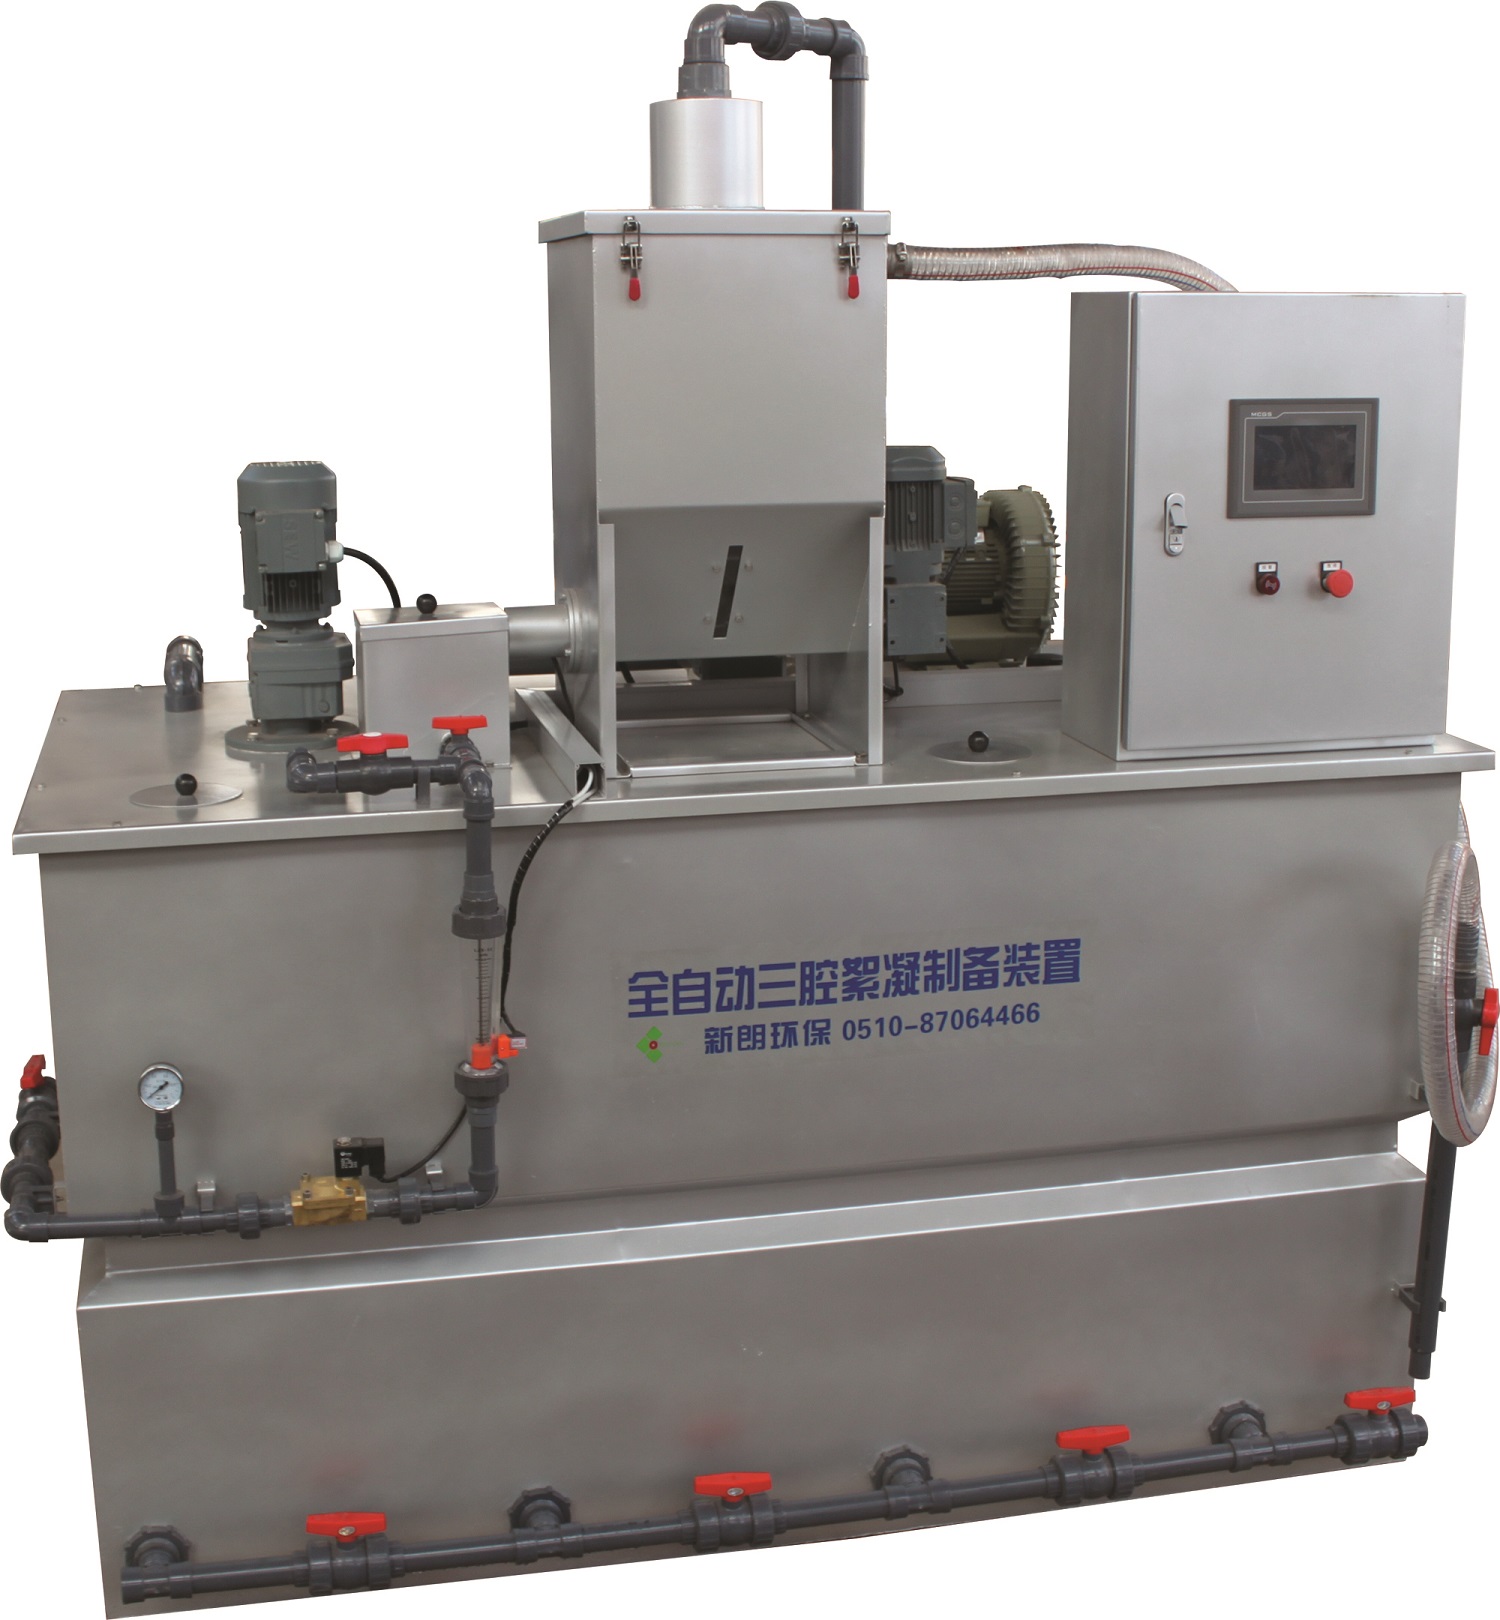 Three cavity preparation flocculation device (stainless steel)